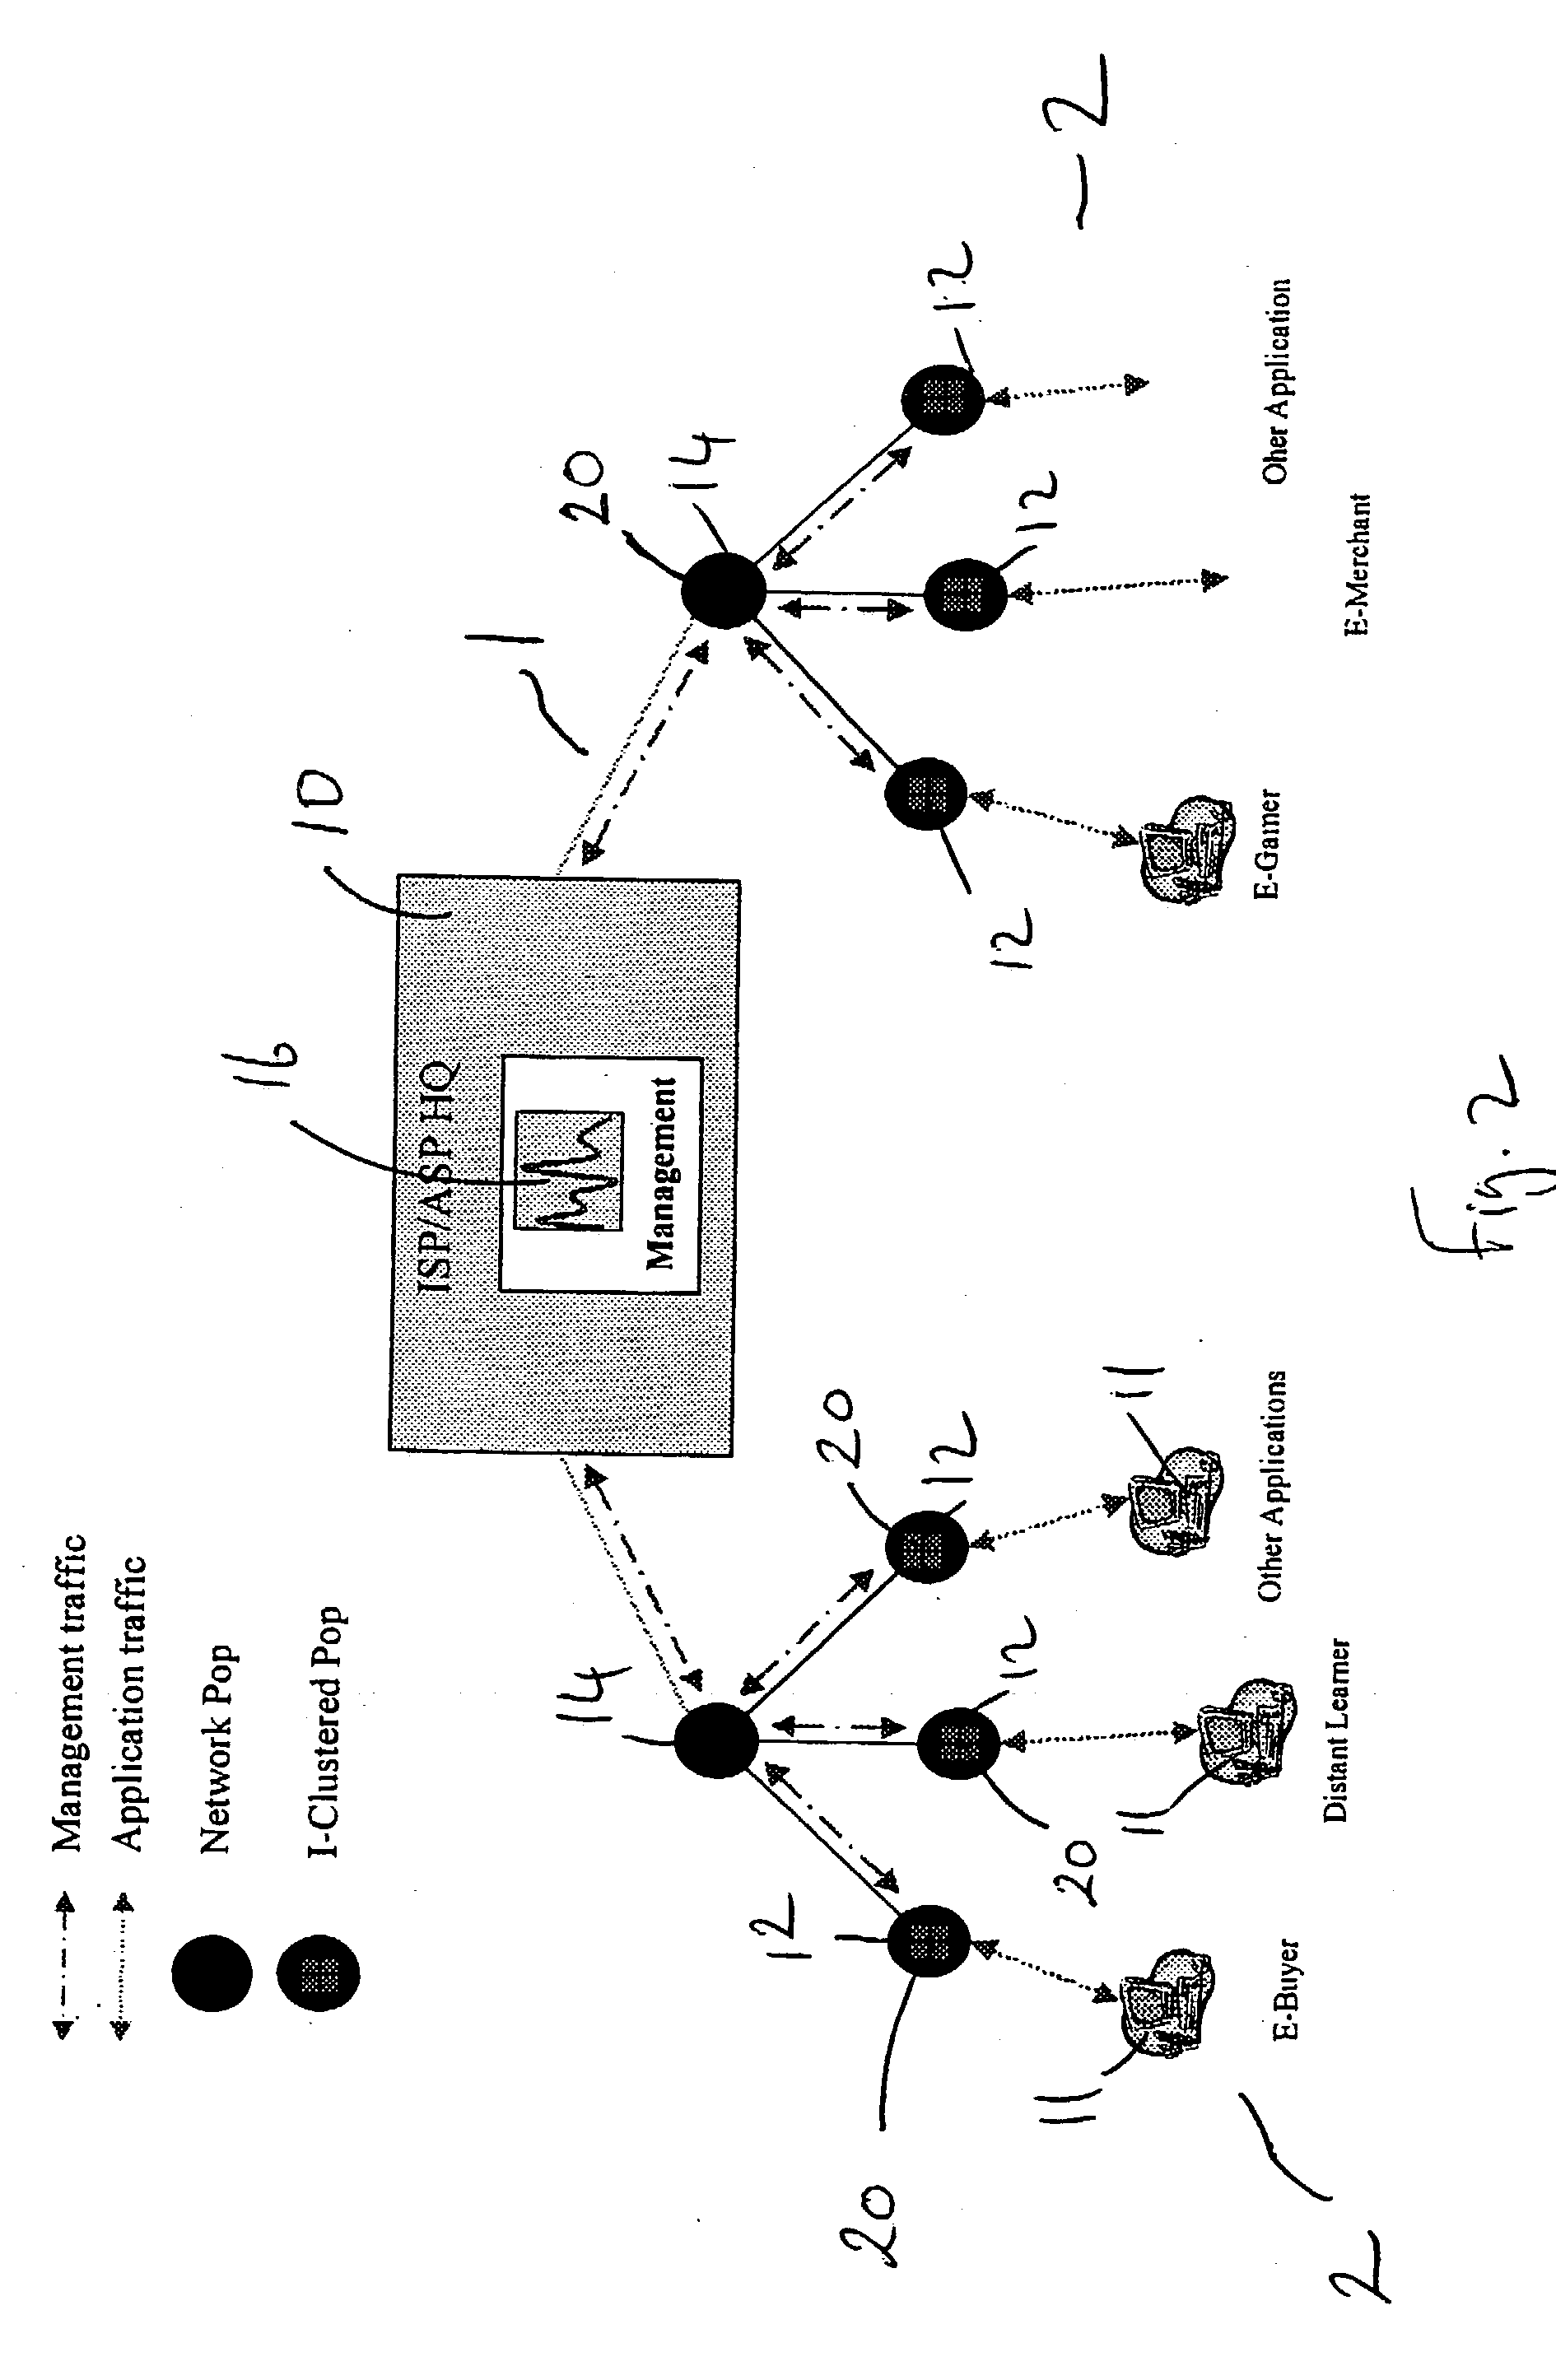 Server module and a distributed server-based internet access scheme and method of operating the same